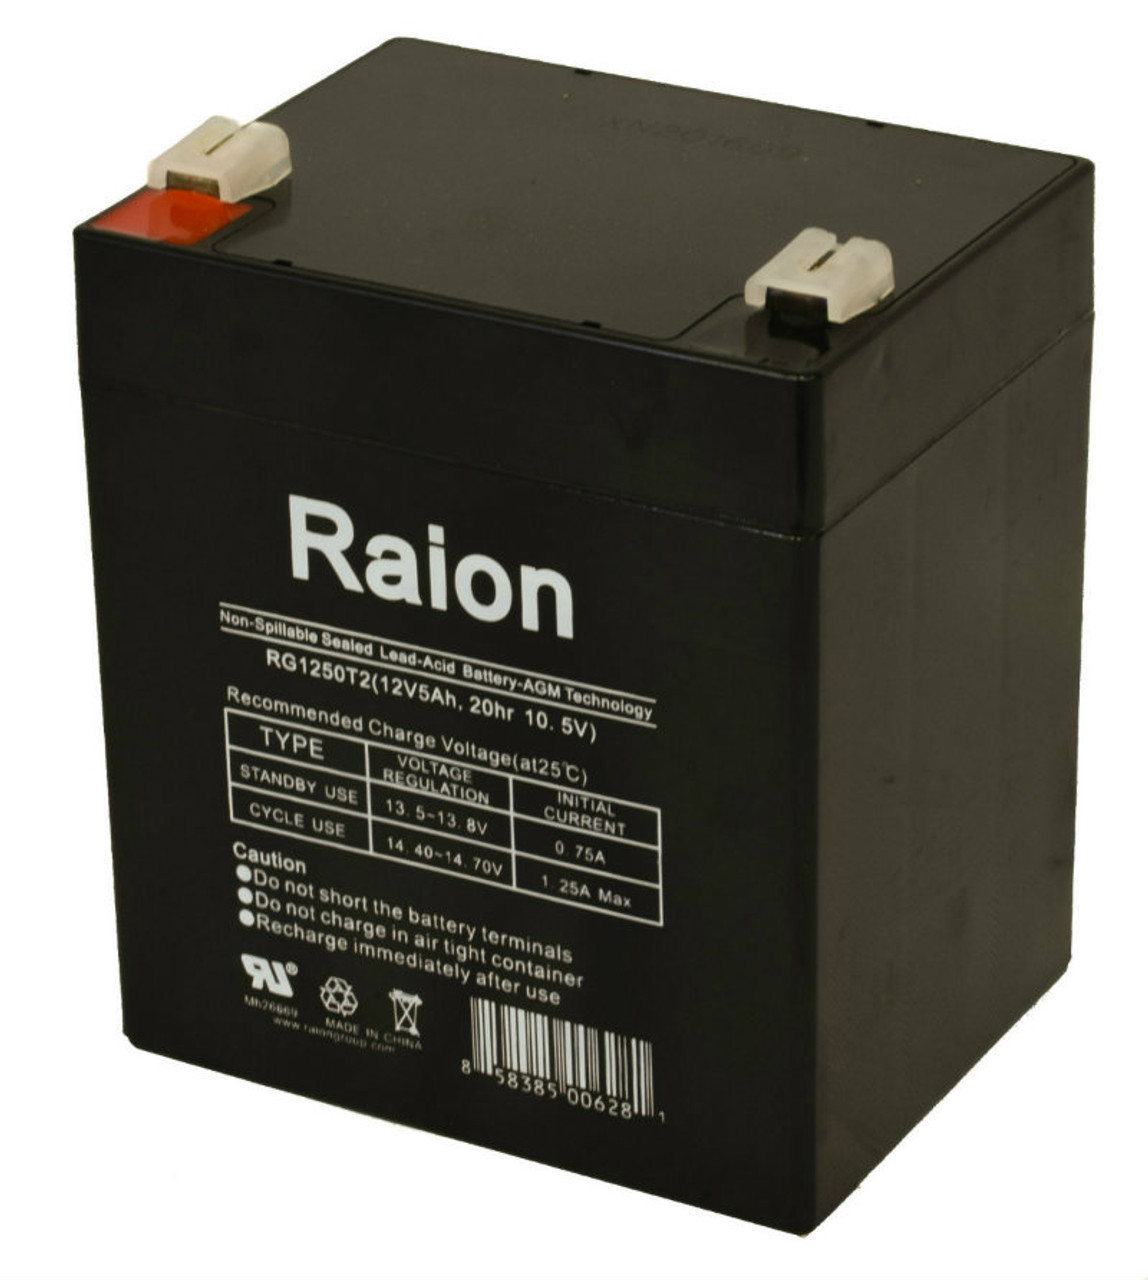 Raion Power RG1250T1 Replacement Fire Alarm Control Panel Battery for Digital Security PC2500